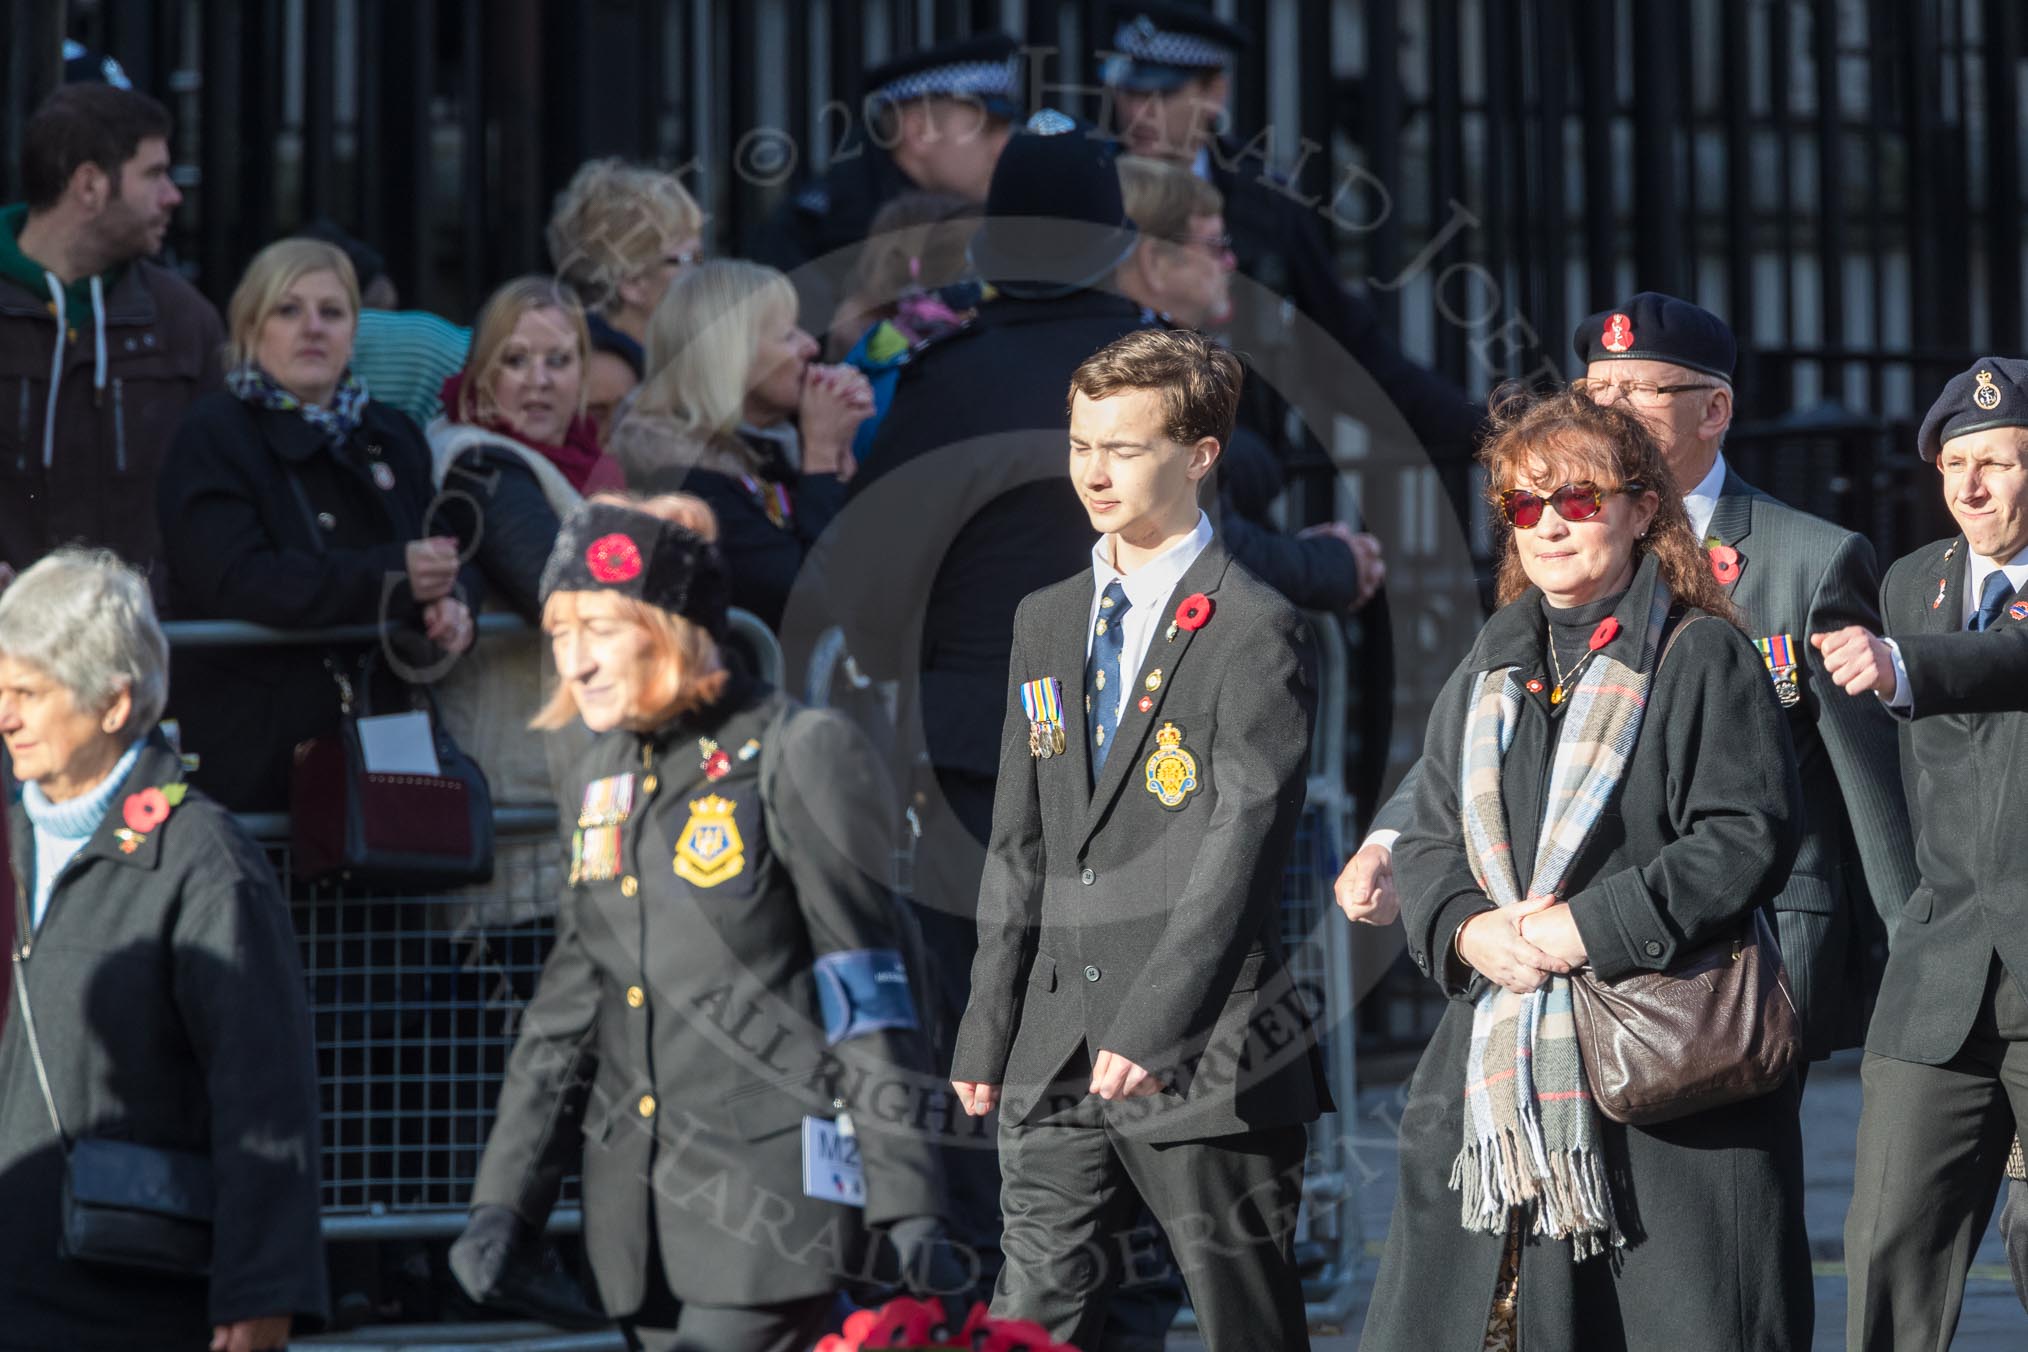 March Past, Remembrance Sunday at the Cenotaph 2016: M21 Fighting G Club.
Cenotaph, Whitehall, London SW1,
London,
Greater London,
United Kingdom,
on 13 November 2016 at 13:16, image #2660